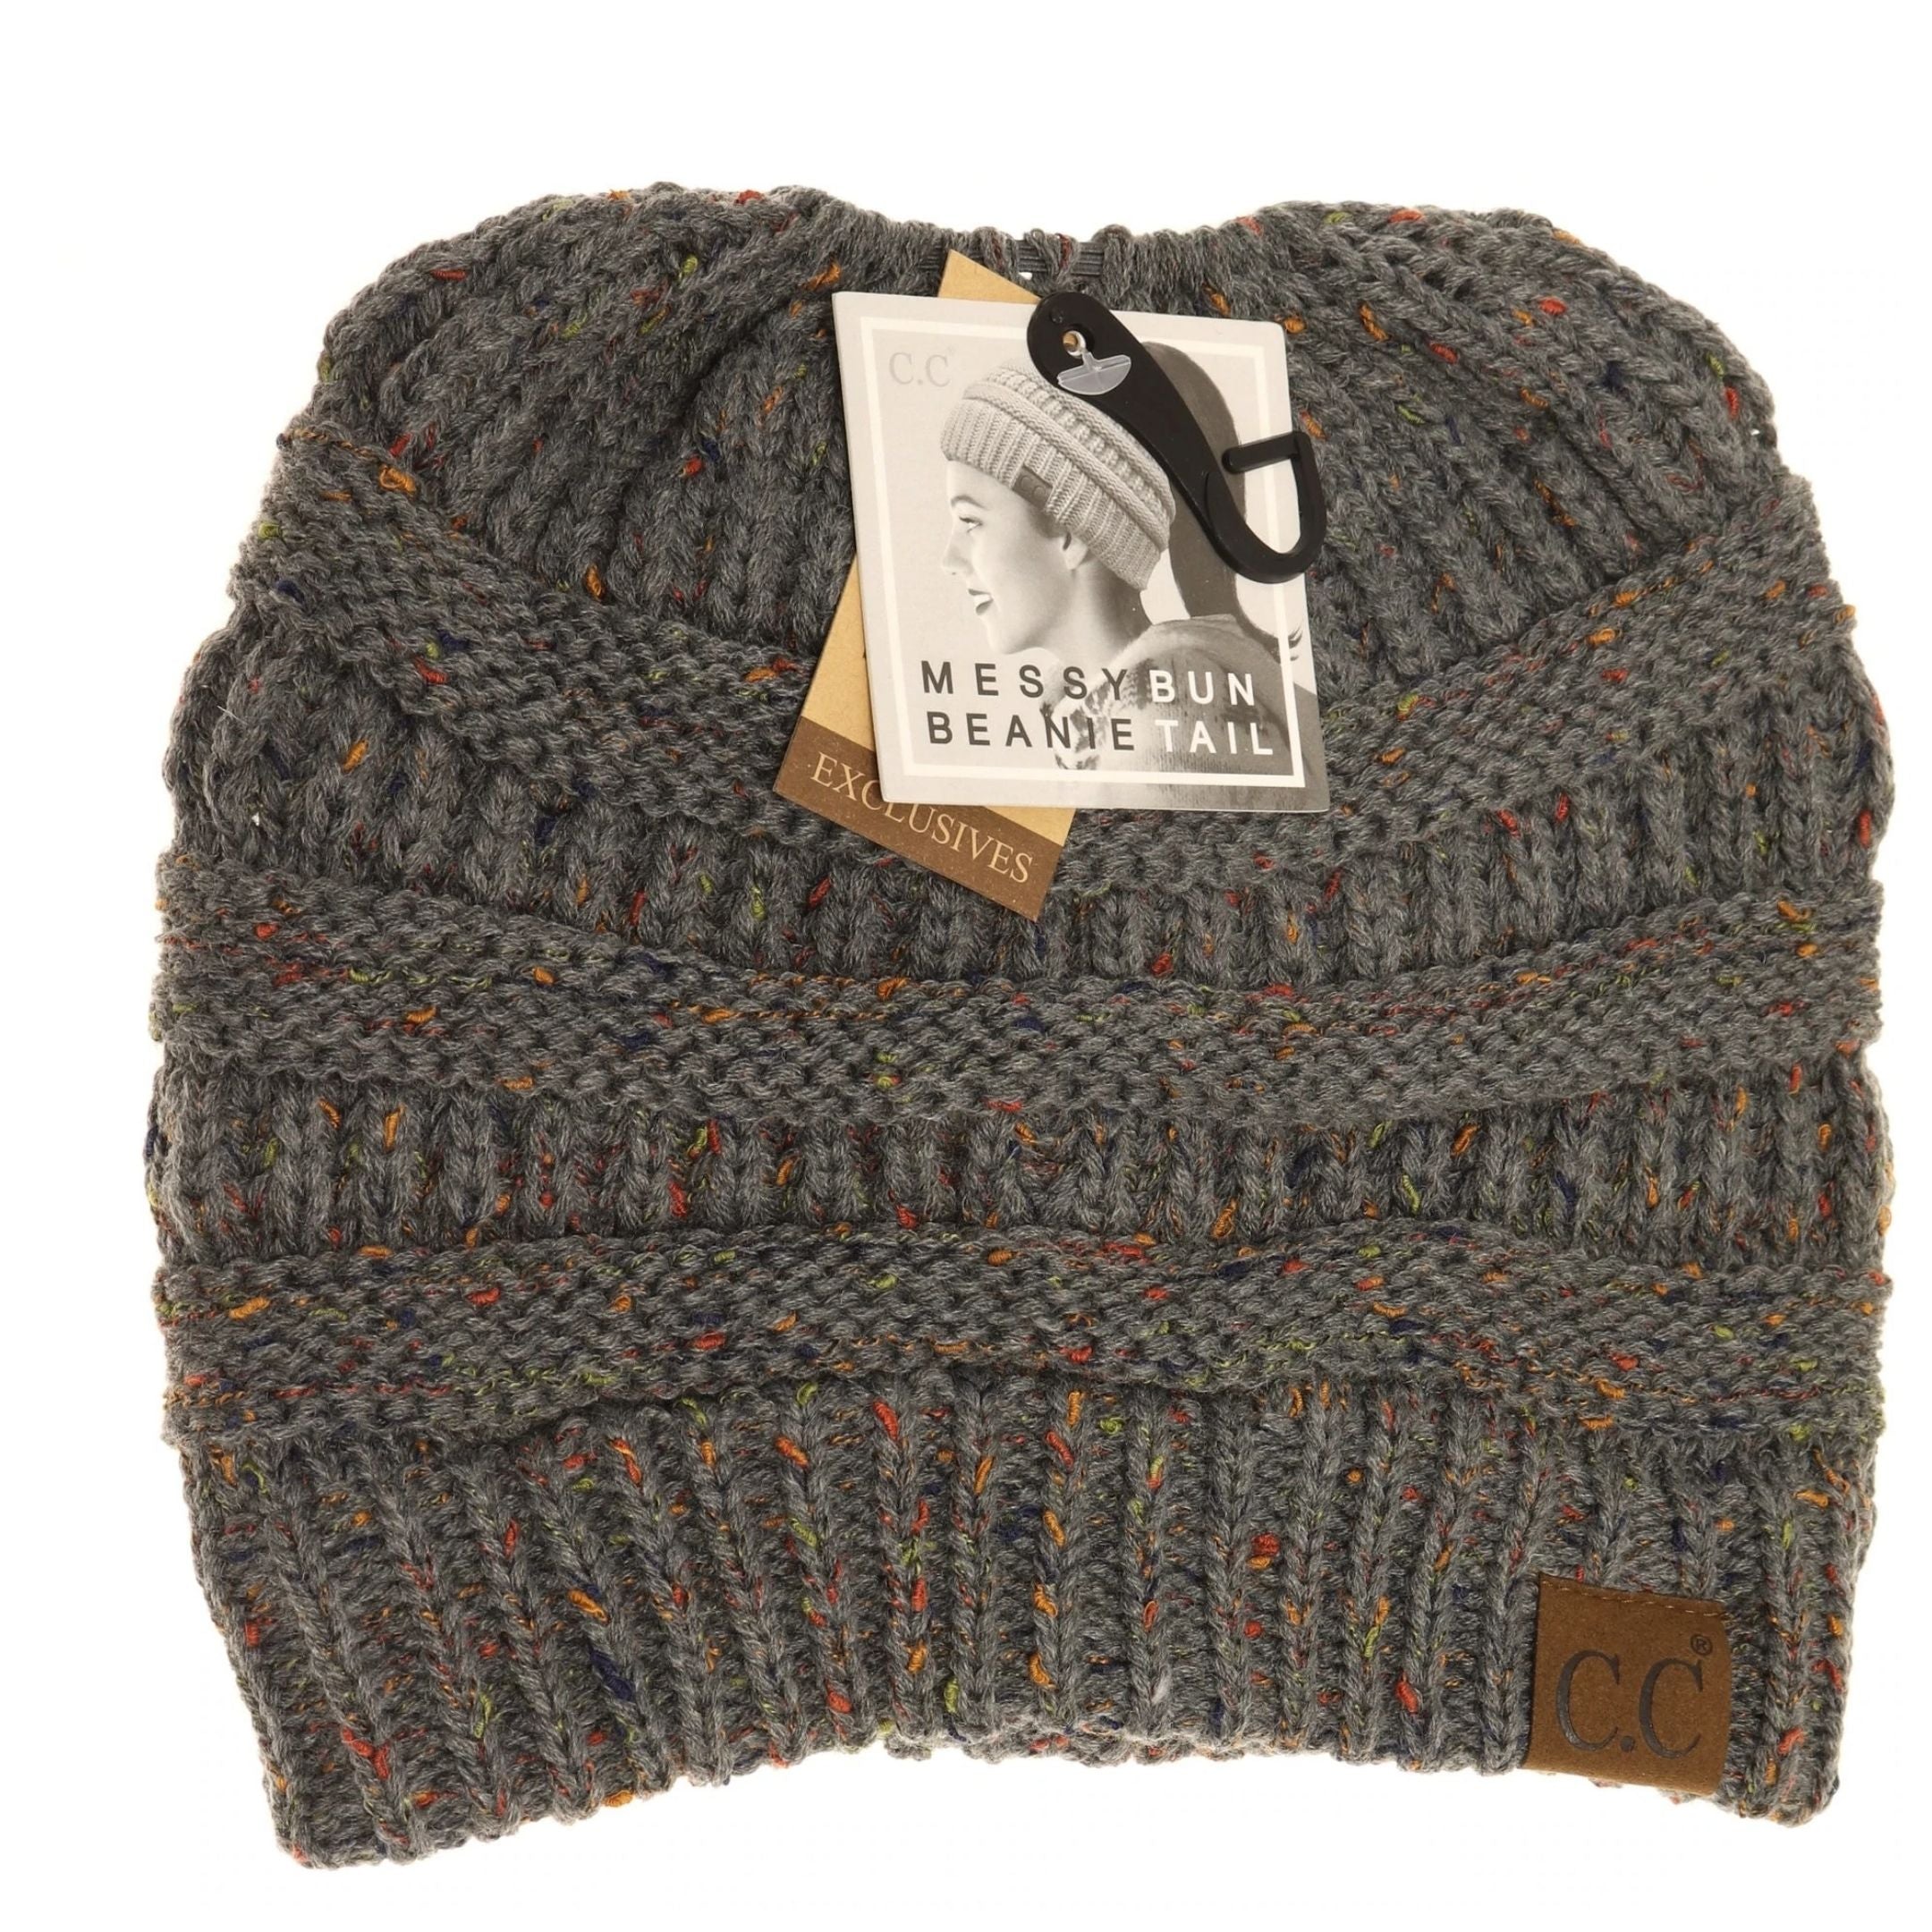 FLECKED BEANIE TAIL CC BEANIE - Hair With A Cause   Oncology Boutique     